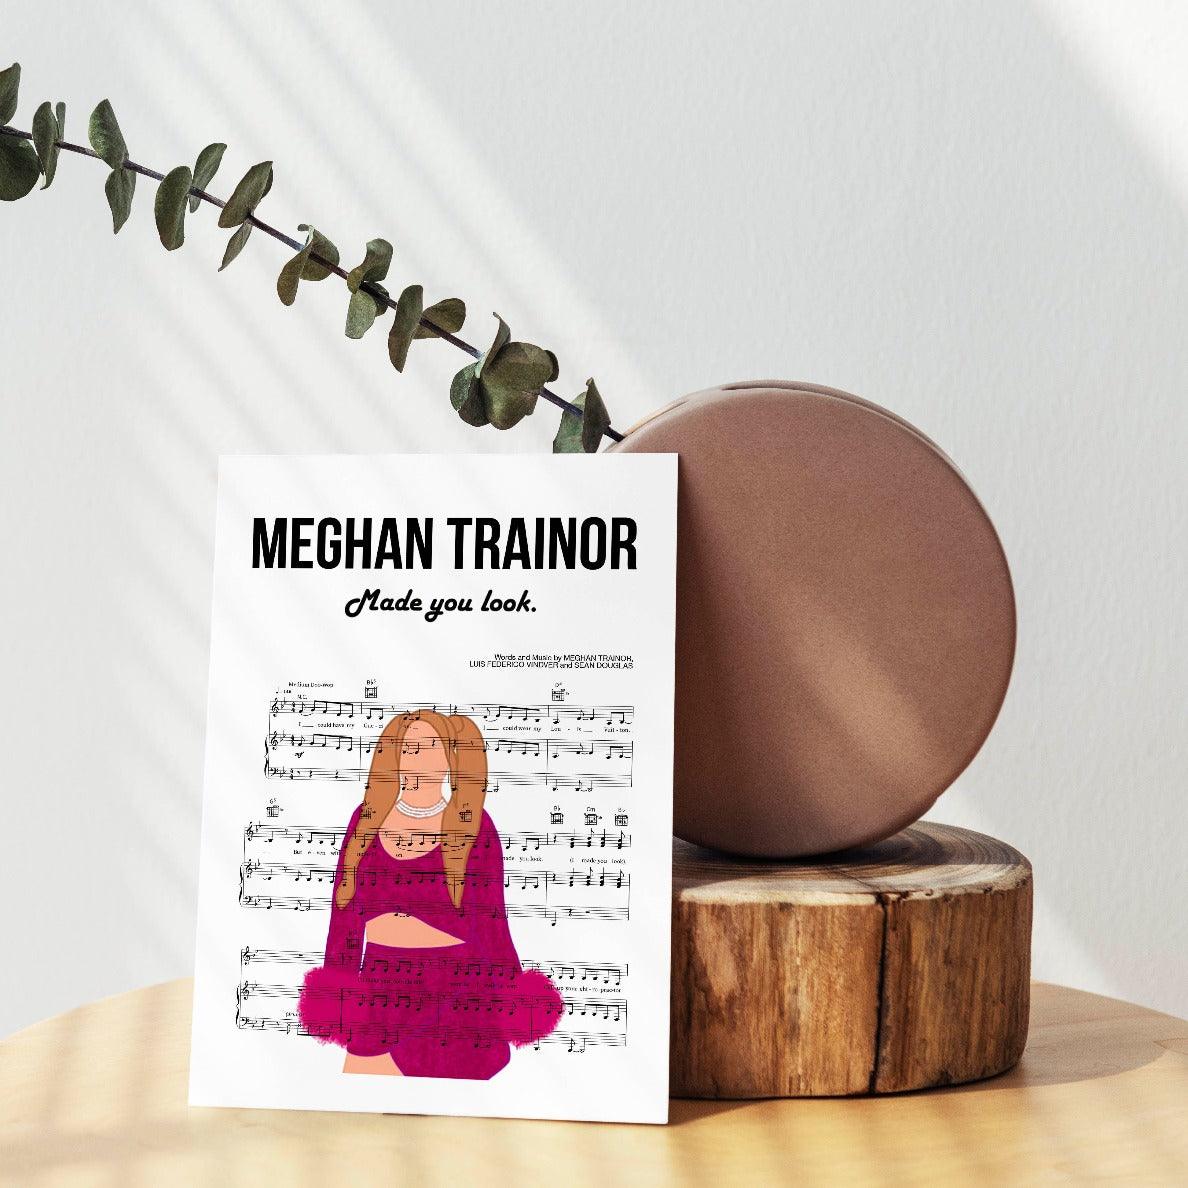 We are pleased to offer this exclusive poster commemorating the release of the hit album, "Made You Look."This poster is a must-have for any fan of the album or of Meghan Trainor. It features the album's cover art and is sized at 18x24 inches for a great look on your wall.Don't miss your chance to get this great poster!